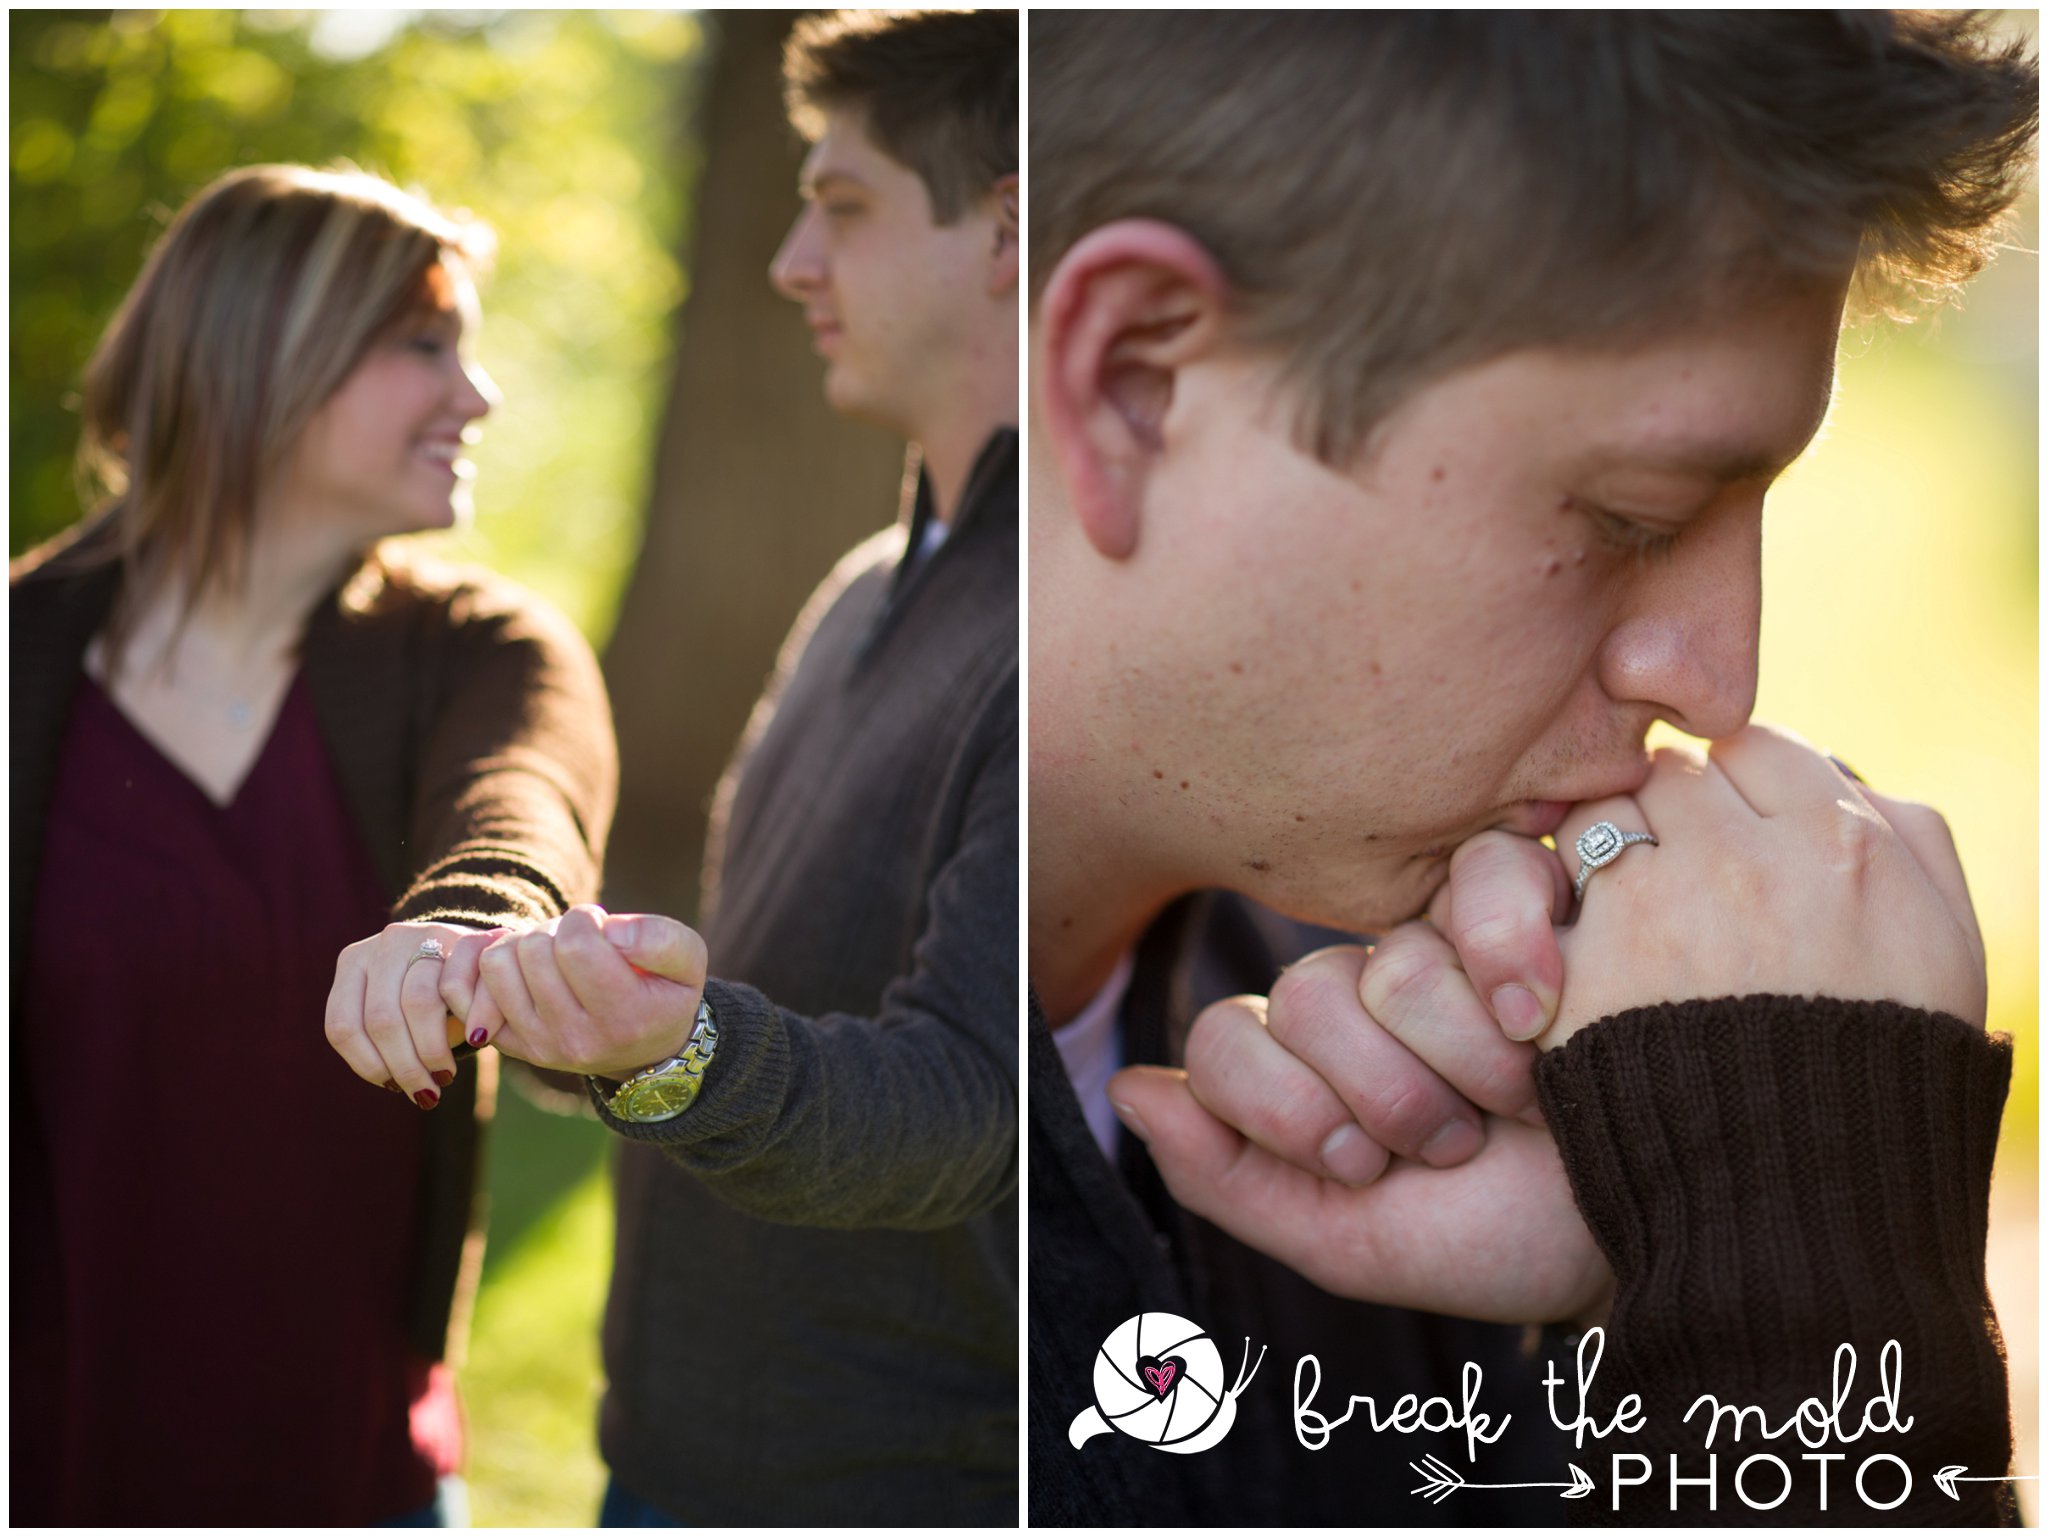 break-the-mold-photo-field-country-engagement-winter-shoot_6642.jpg